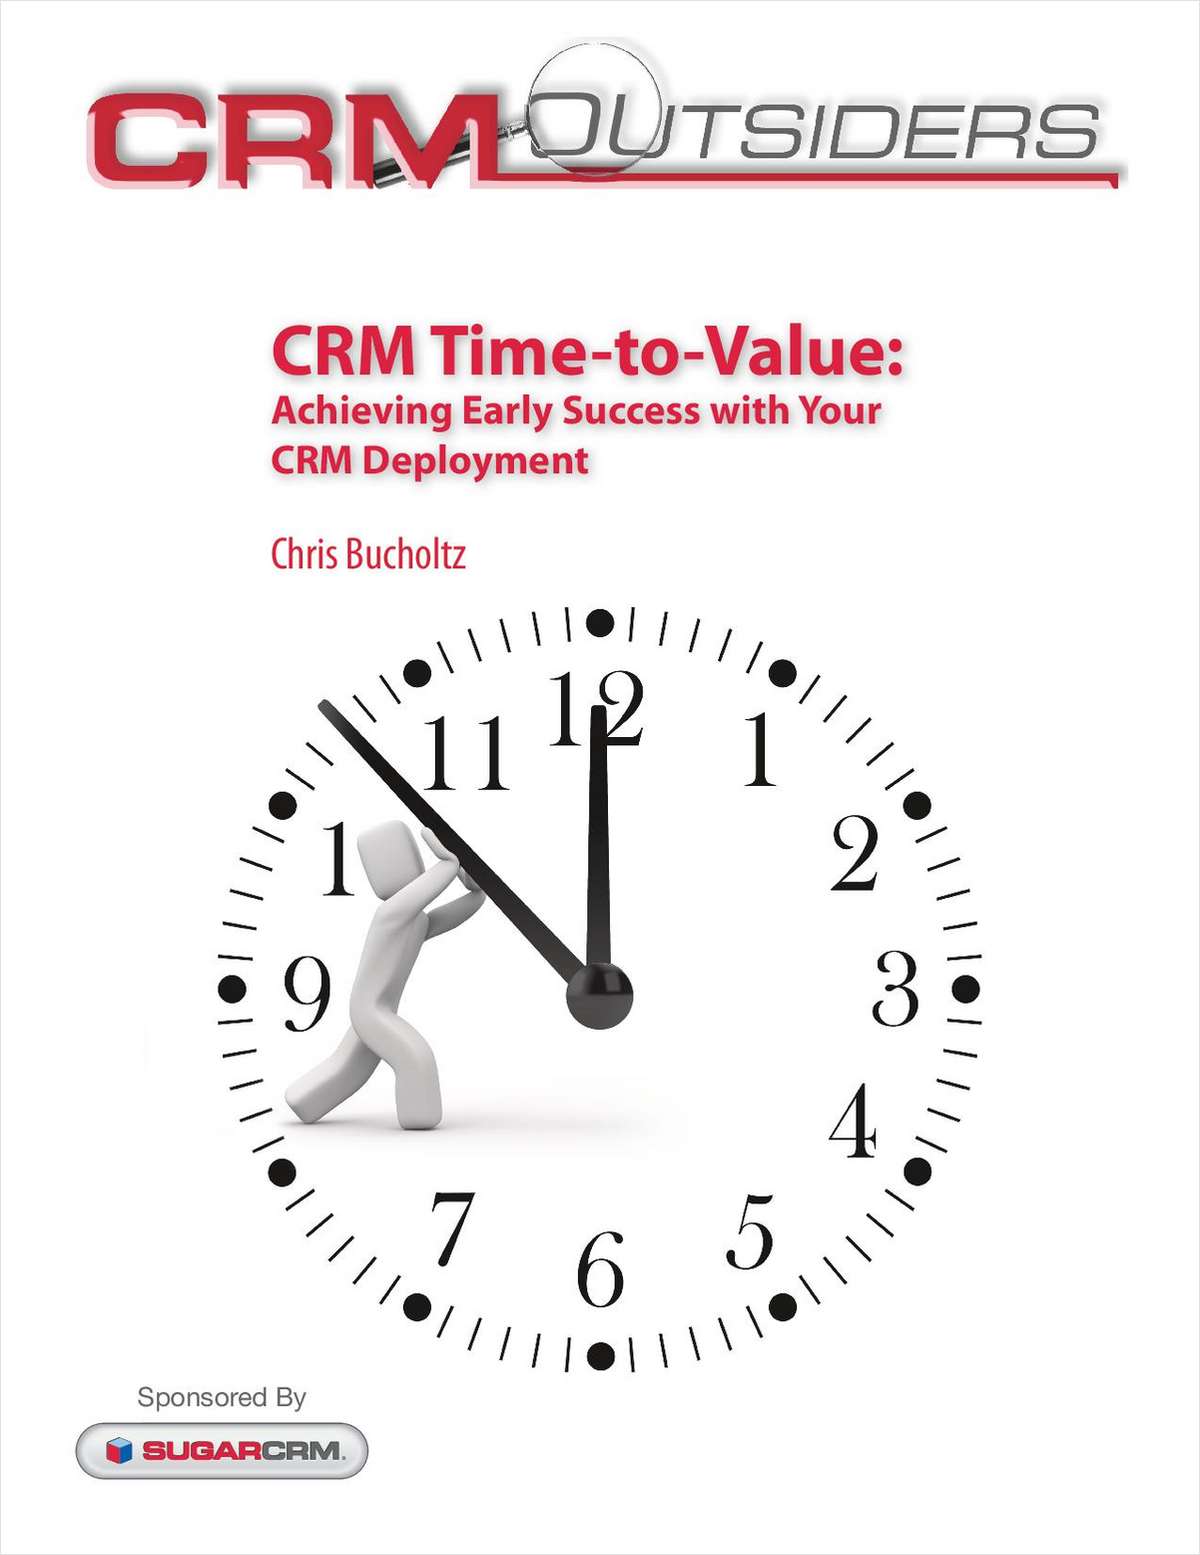 CRM Time-to-Value: Achieving Early Success with Your CRM Deployment